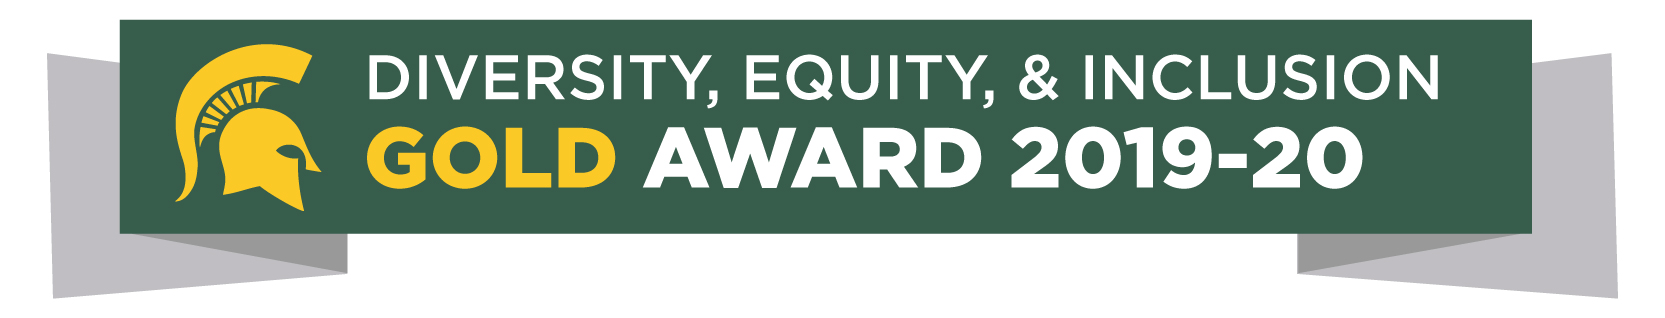 Diversity, Equity and Inclusion Gold Award 2019-2020